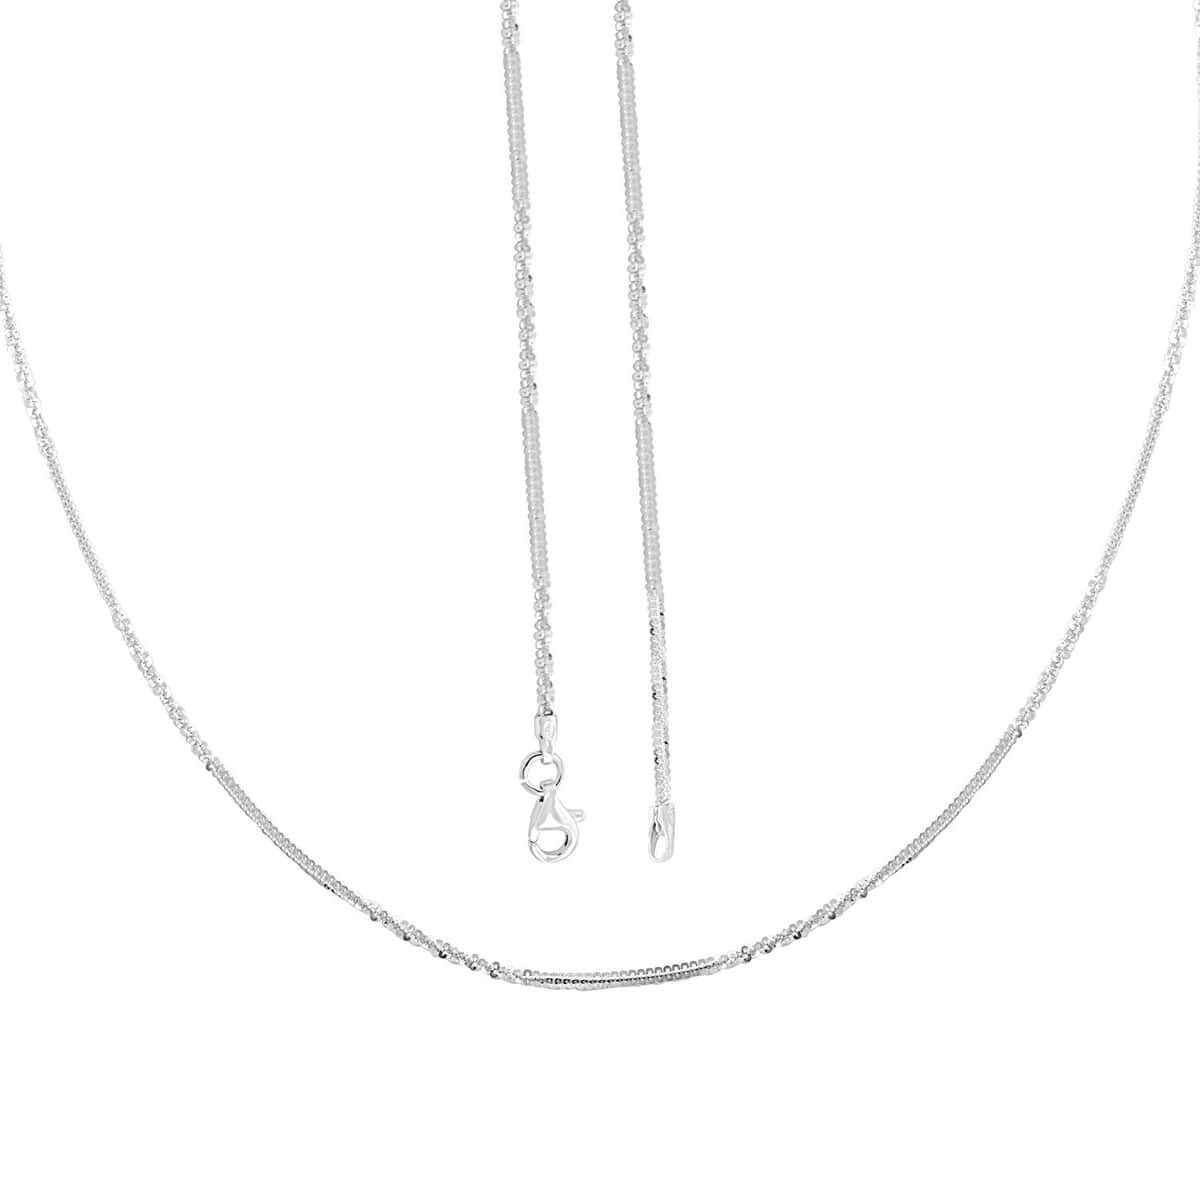 Buy Italian Sterling Silver Margherita Alternate Chain Necklace 24 Inches  4.90 Grams at